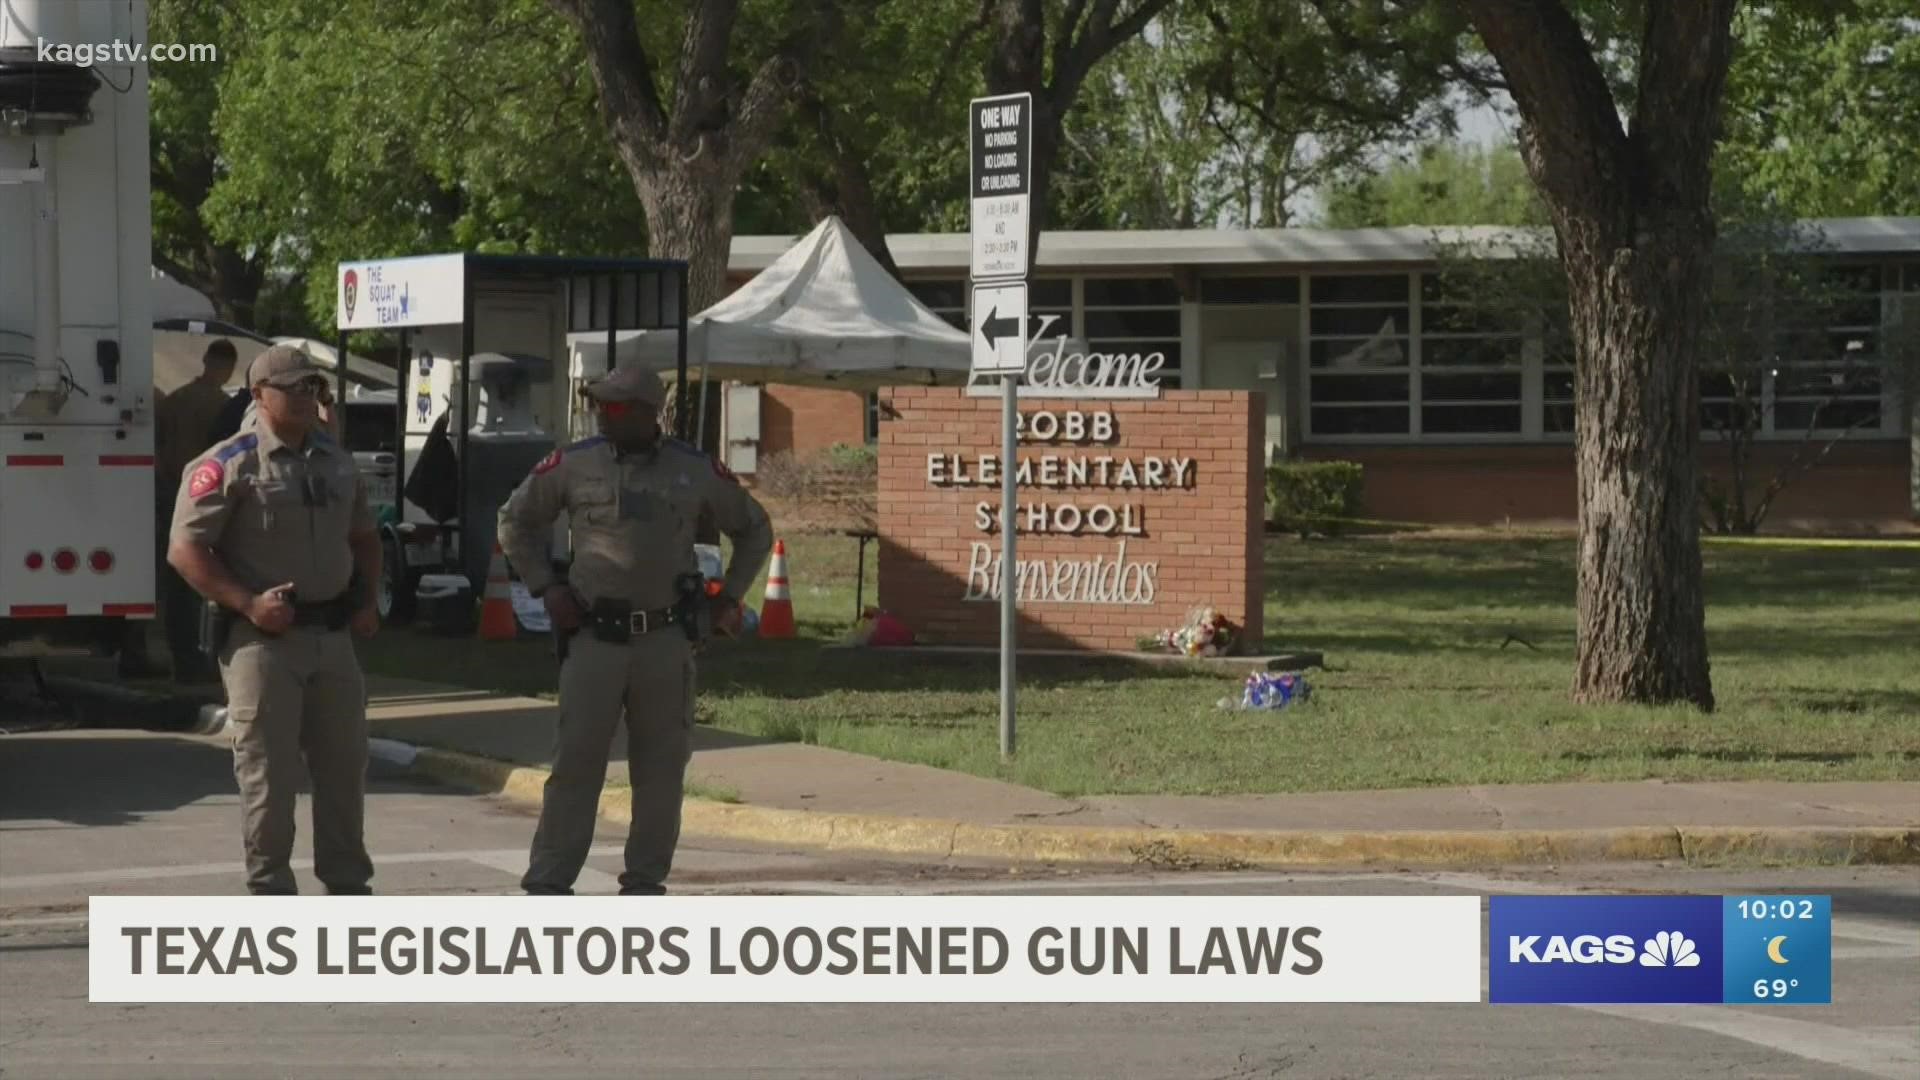 Pete sessions gave his thoughts about stricter gun laws here in Texas